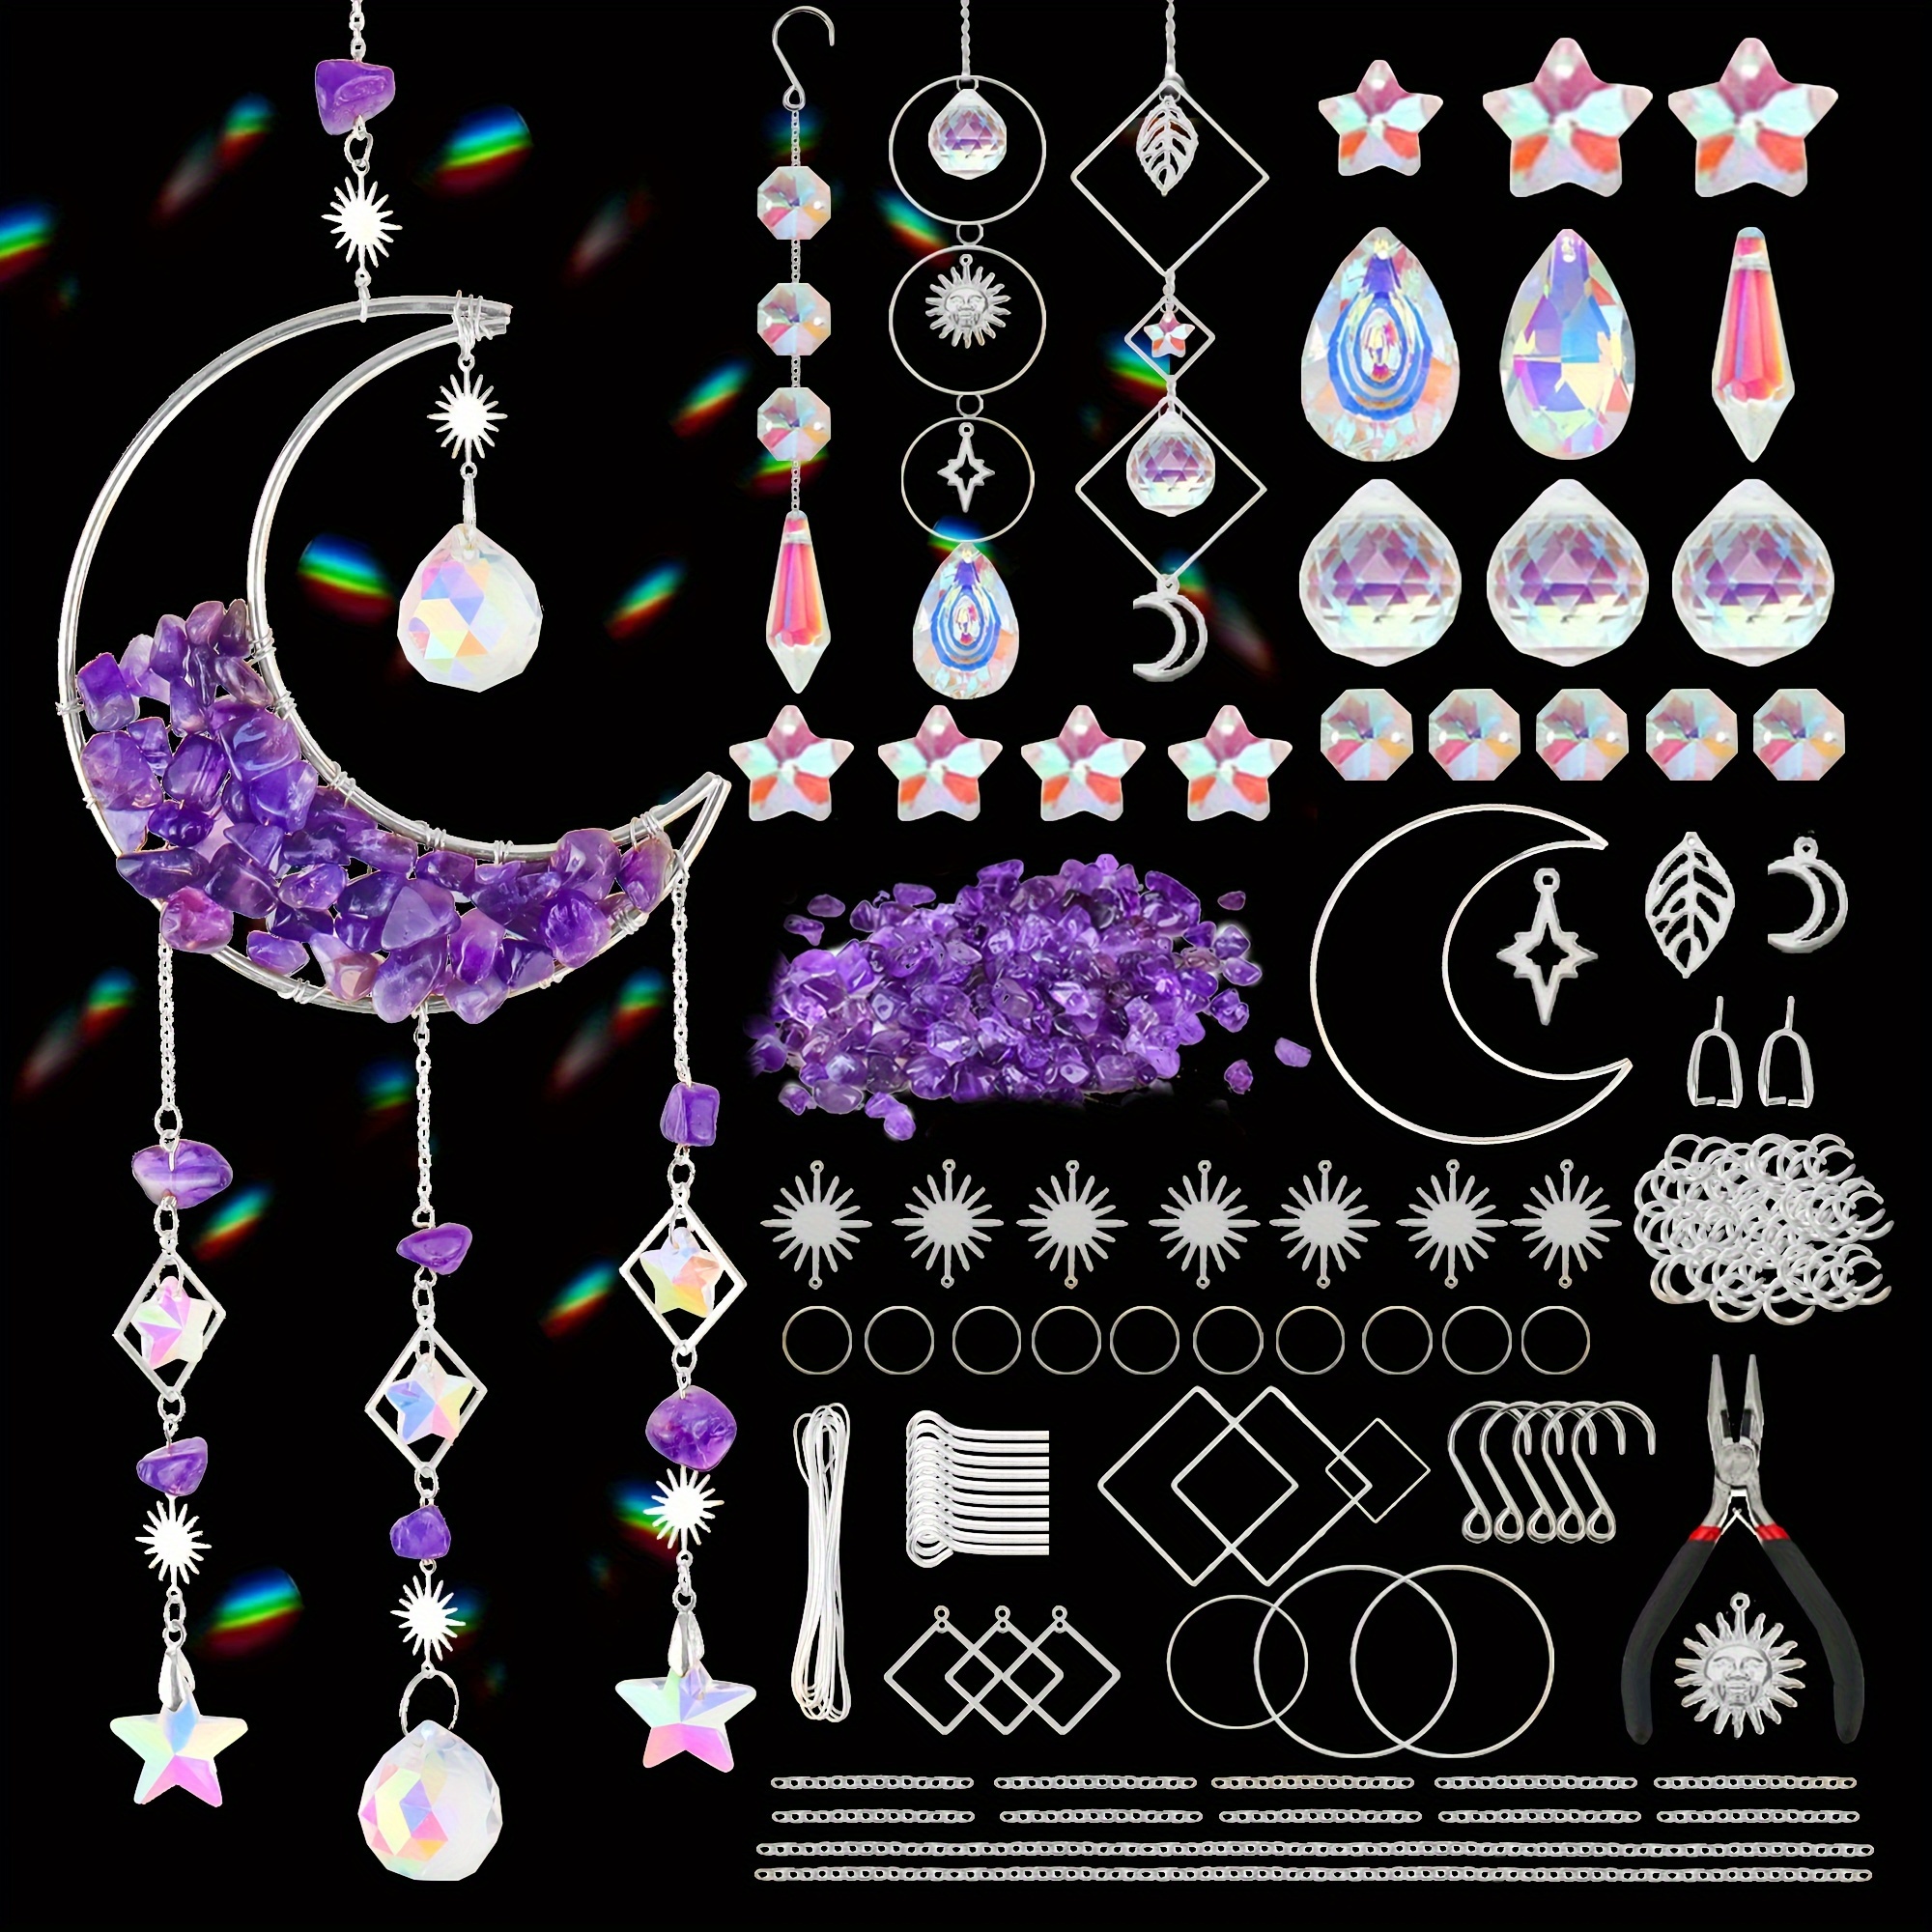  57 Pcs Crystal Suncatcher Hanging Sun Catcher Kits for Adults  Colorful Crystals Suncatchers Prisms with Chain Pendant Ornament Suncatchers  DIY Crafts for Window Home Office Garden Decoration (Gold) : Patio